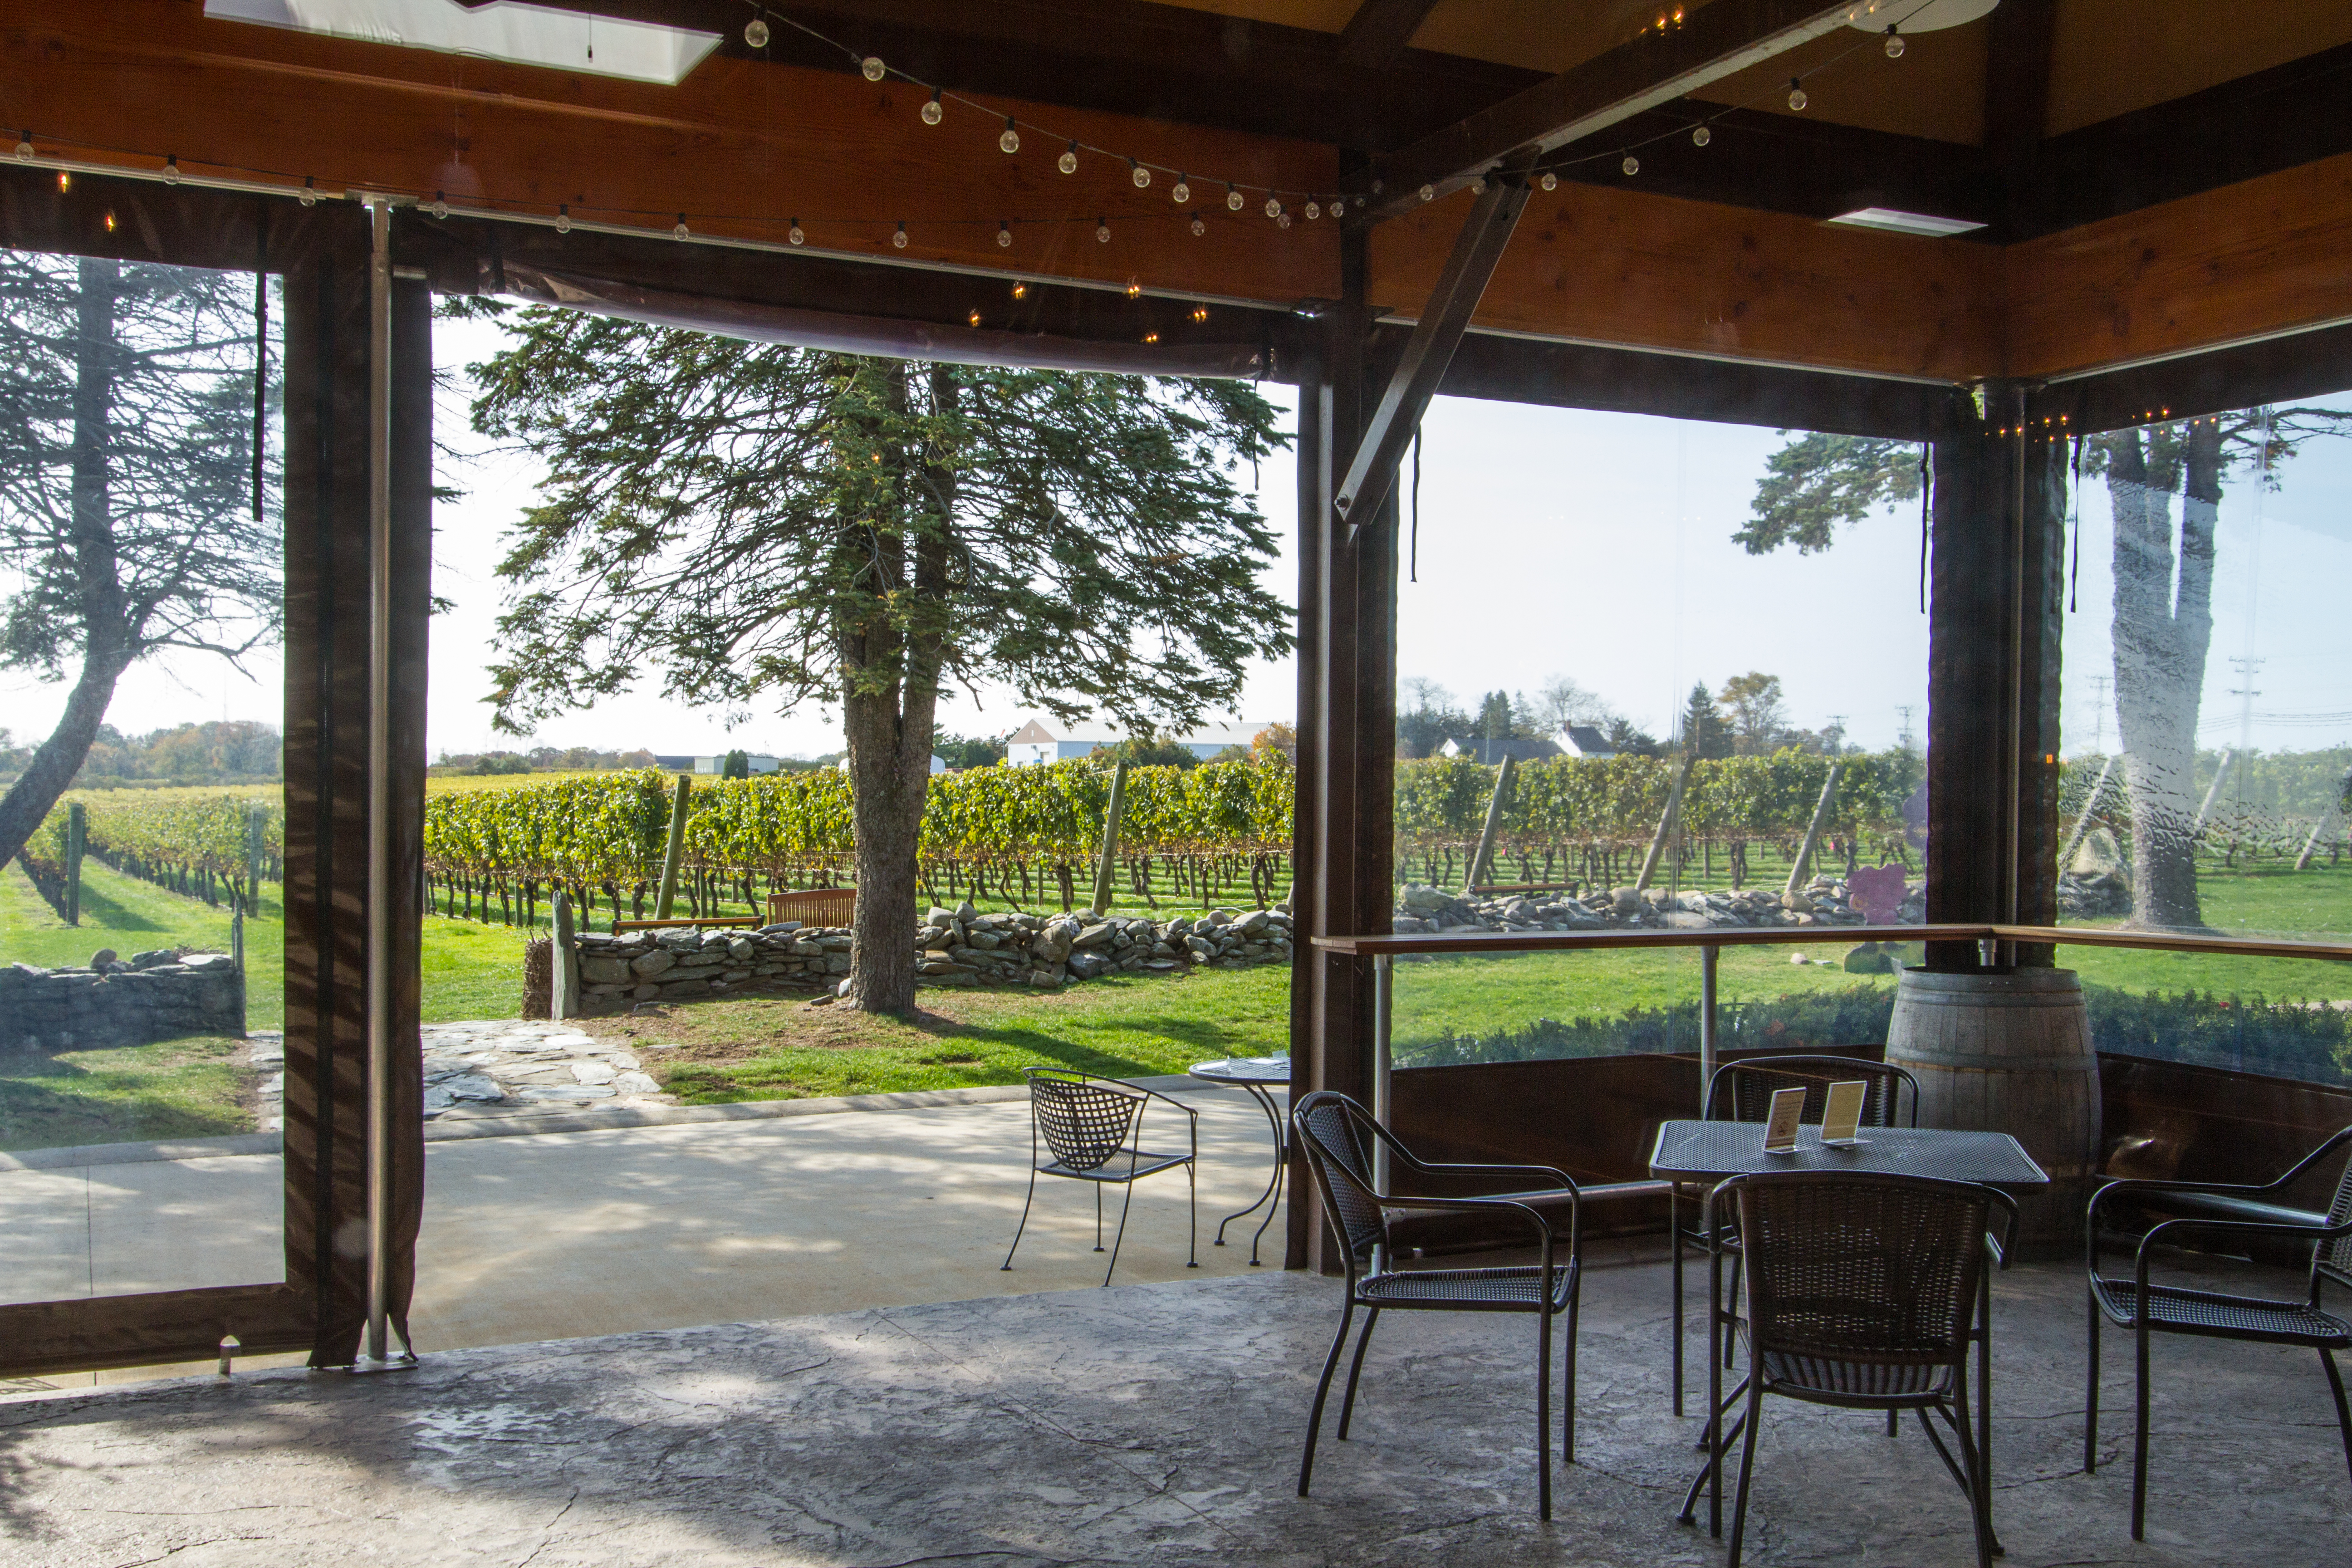 Covered patio at Newport Vineyards